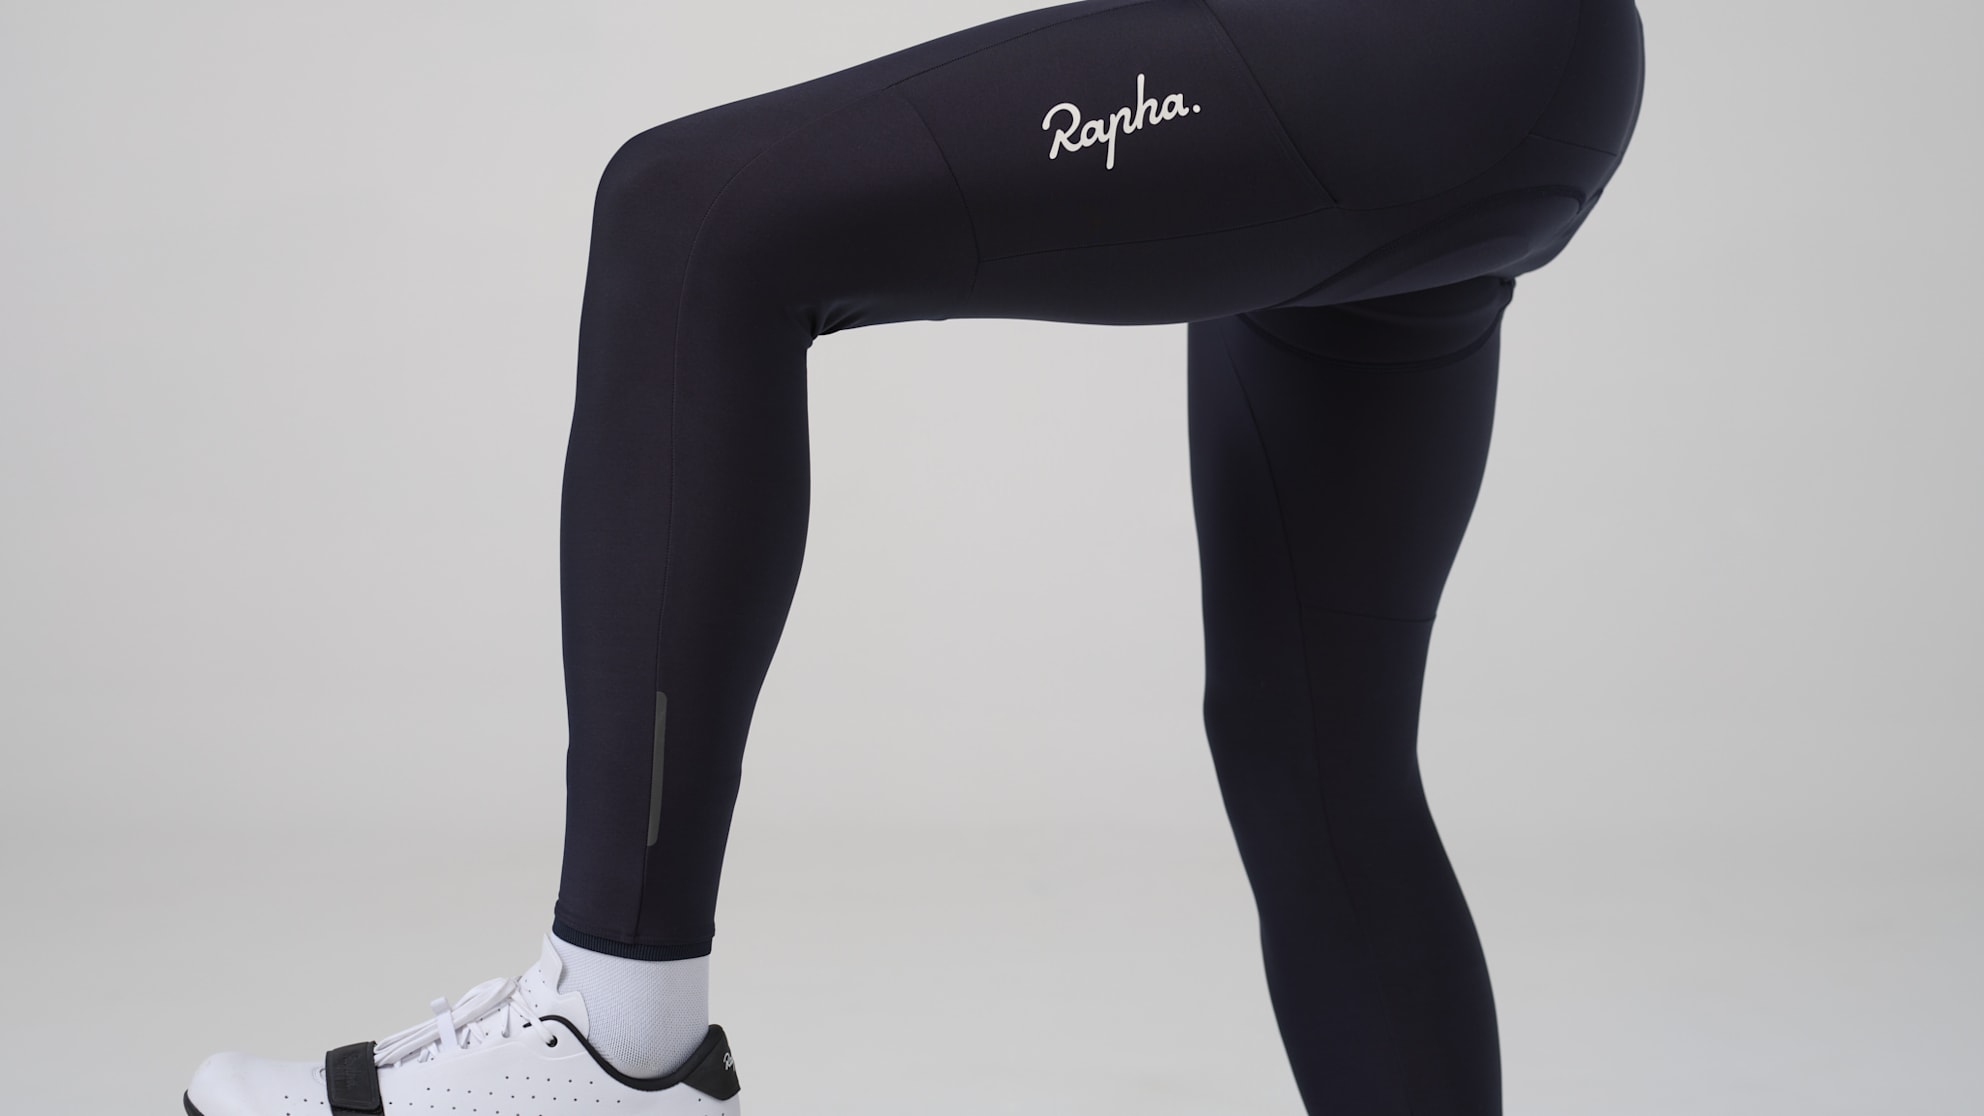 https://media.rapha.cc/image/upload/ar_16:9,c_fill,f_auto,q_auto,w_992,dpr_2.0/v1667814346/triptych/AHO01XX_Core-Cargo-Winter-Tights-with-Pads_H222_model_6.jpg